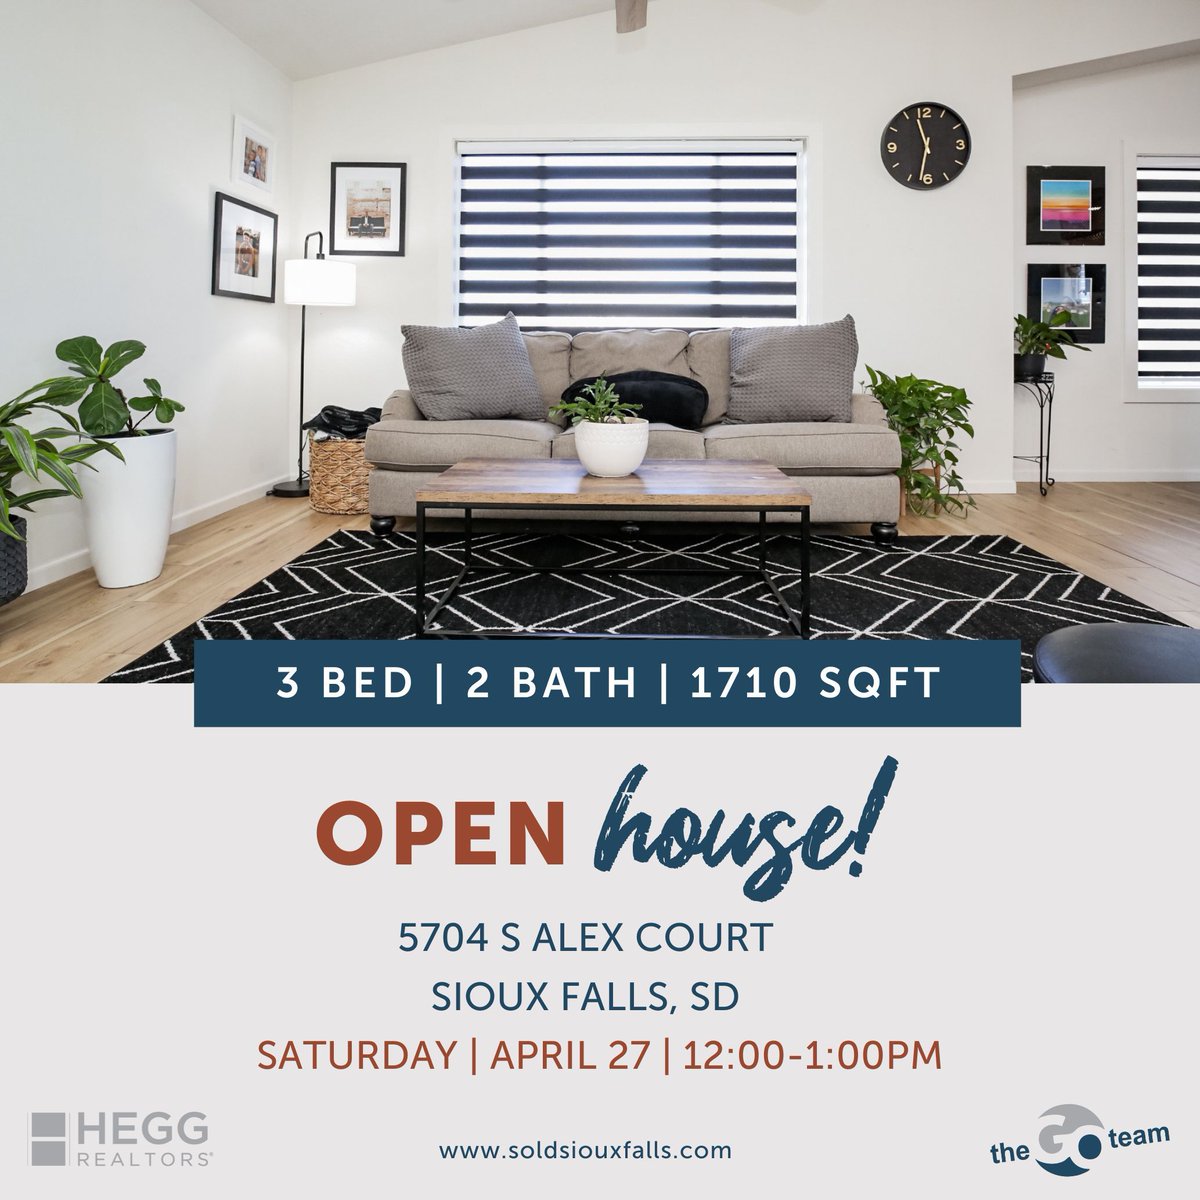 Open House | Saturday | 12:00-1:00pm
📍 5704 S Alex Ct | Sioux Falls
🛏️ 3 Bed | 🛁 2 Bath | 🏡 1710 SqFt

#openhouse #thegoteam #soldsiouxfalls #justlisted #siouxfallsrealestate #realestate